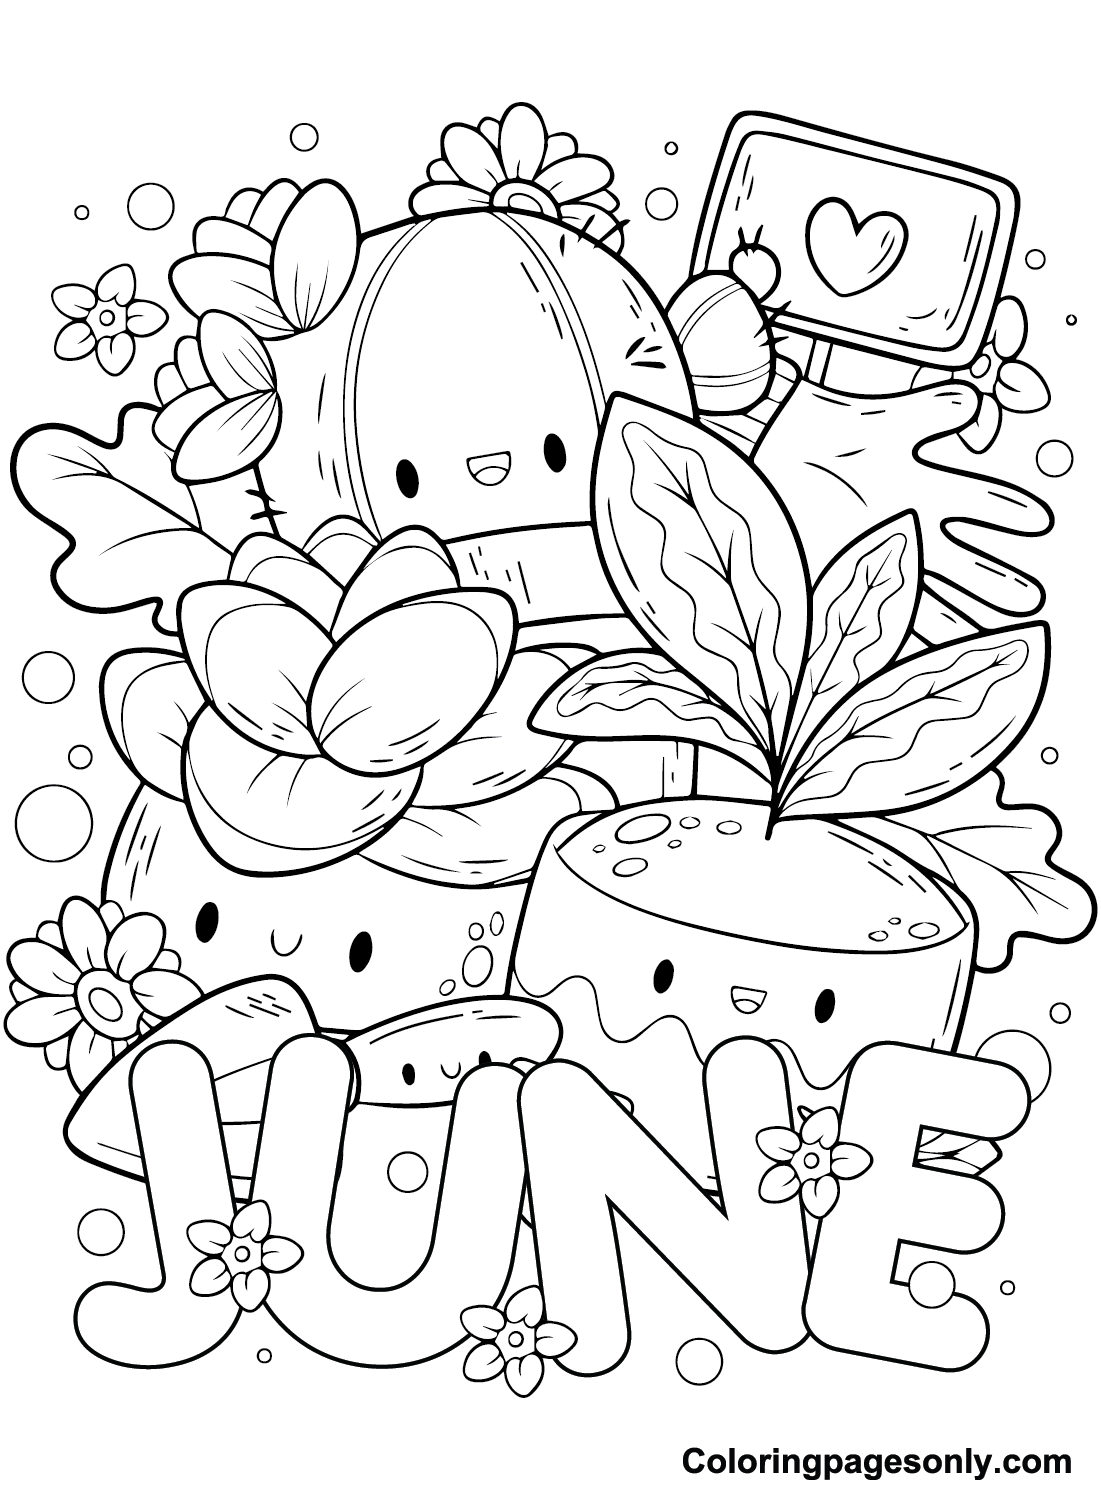 June Free Coloring Pages